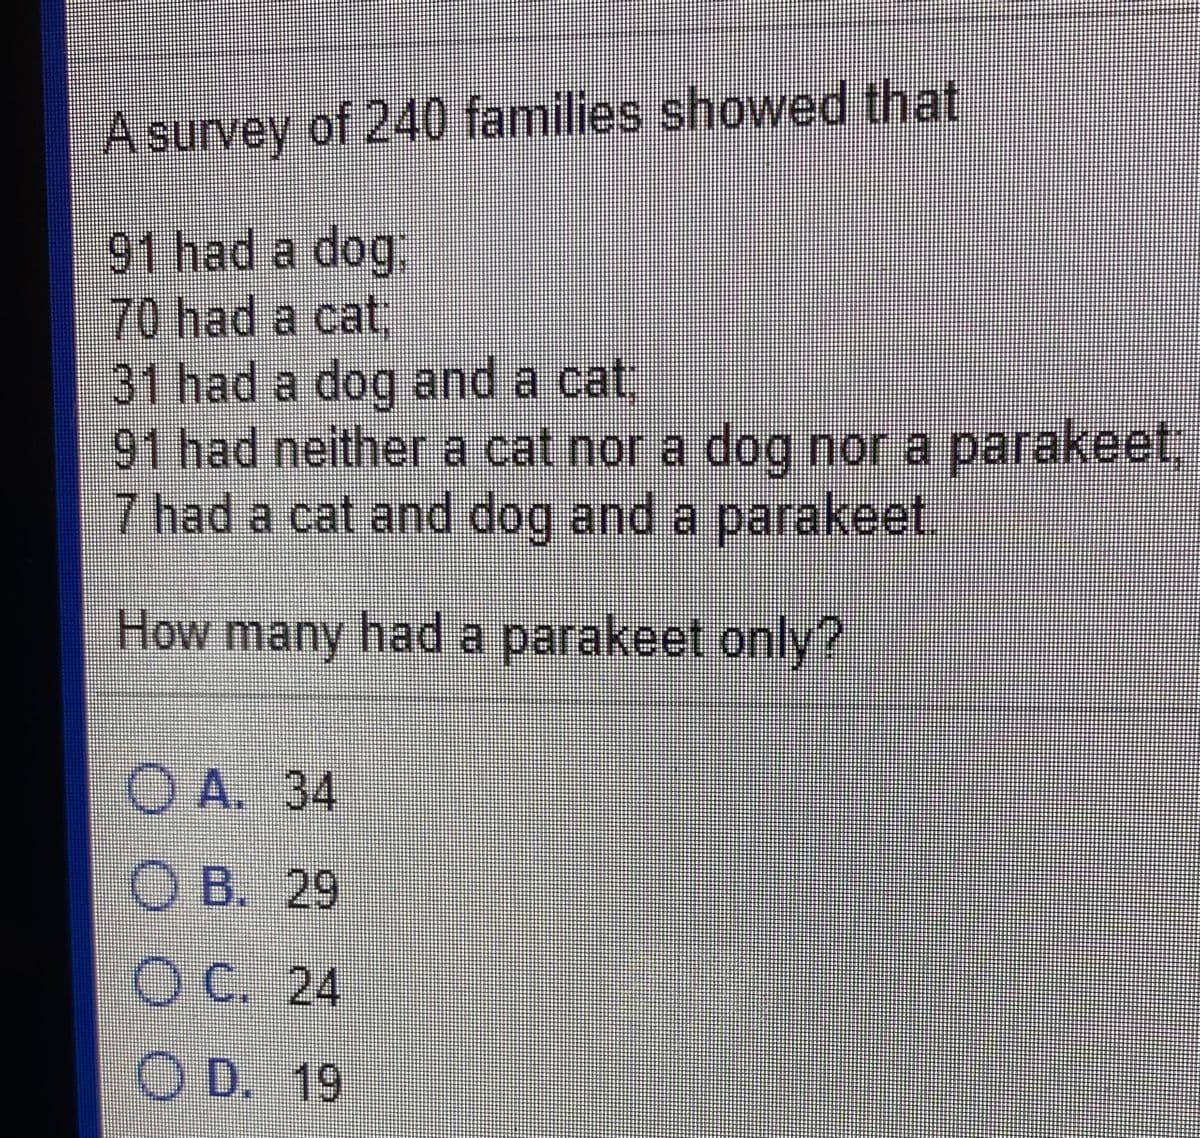 A survey of 240 families showed that
91 had a dog:
70had a cat;
31 had a dog and a cat:
91 had neither a cat nor a dog nor a parakeet,
7 had a cat and dog and a parakeet.
How many had a parakeetonly?
О А. 34
ОВ. 29
OC. 24
O D. 19
